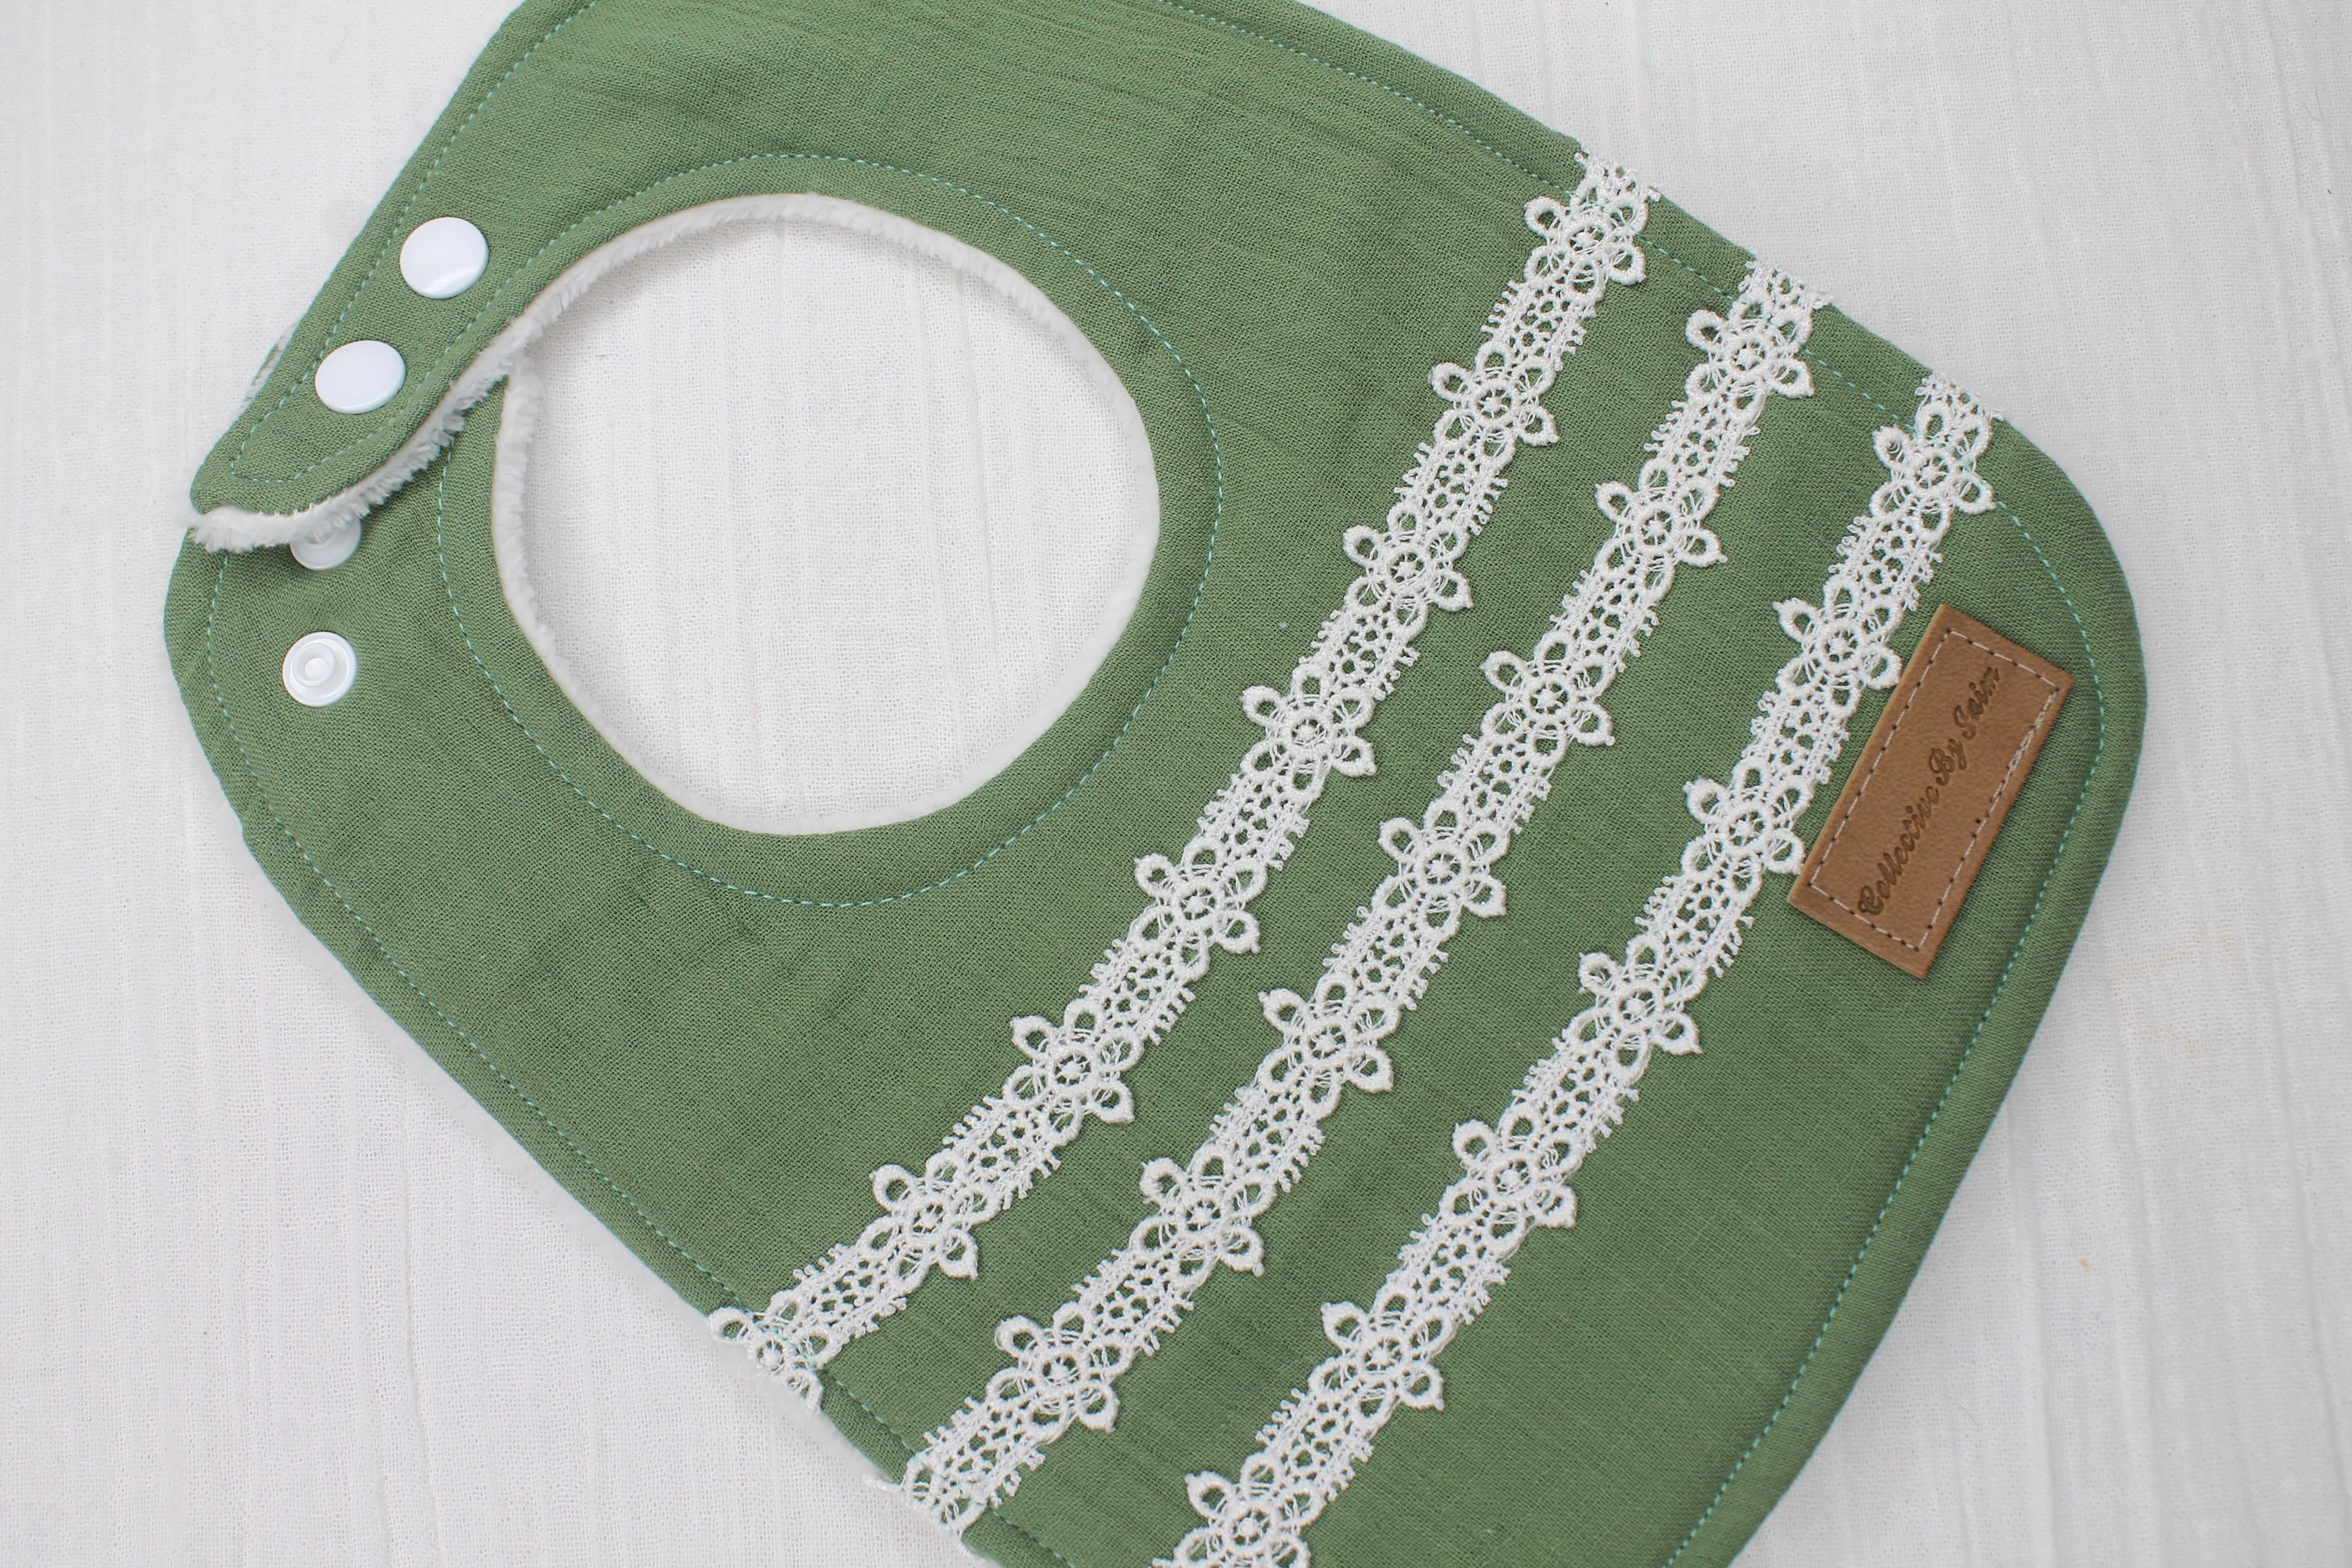 Sage Double Cloth Daisy Chain Lace Bib with Fleece Backing